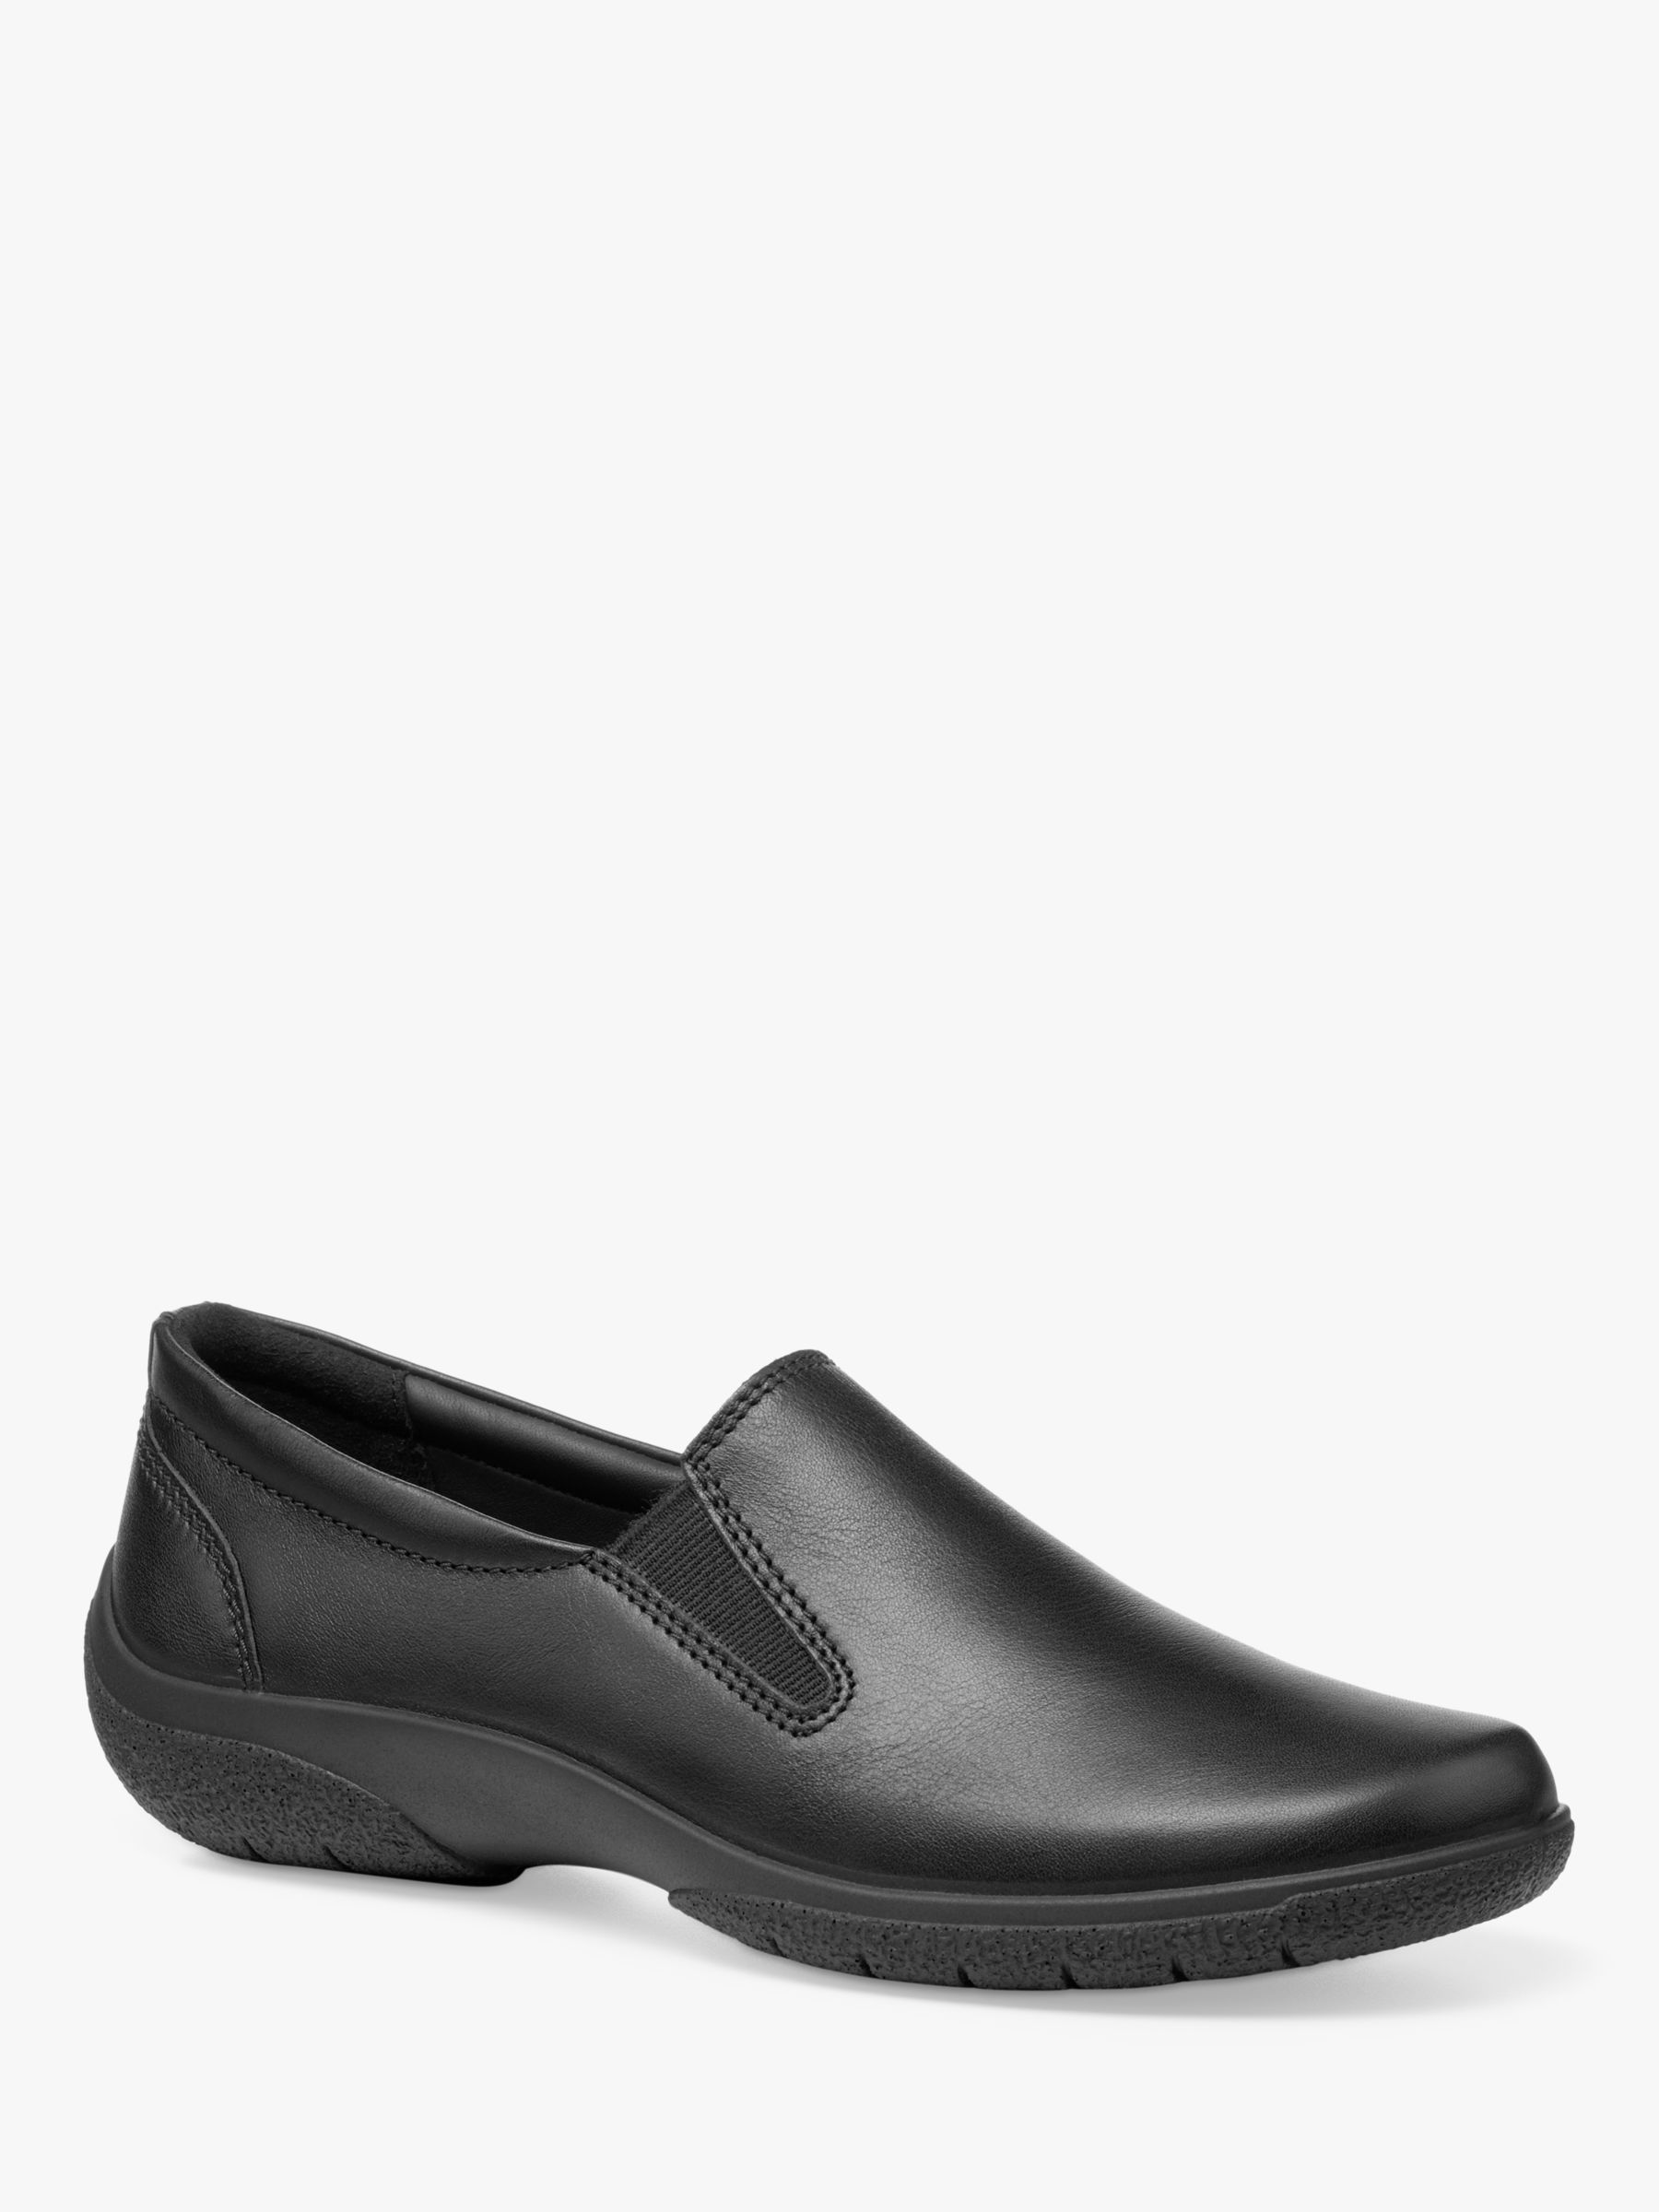 Buy Hotter Glove II Extra Wide Fit Leather Slip-On Shoes, Black Online at johnlewis.com